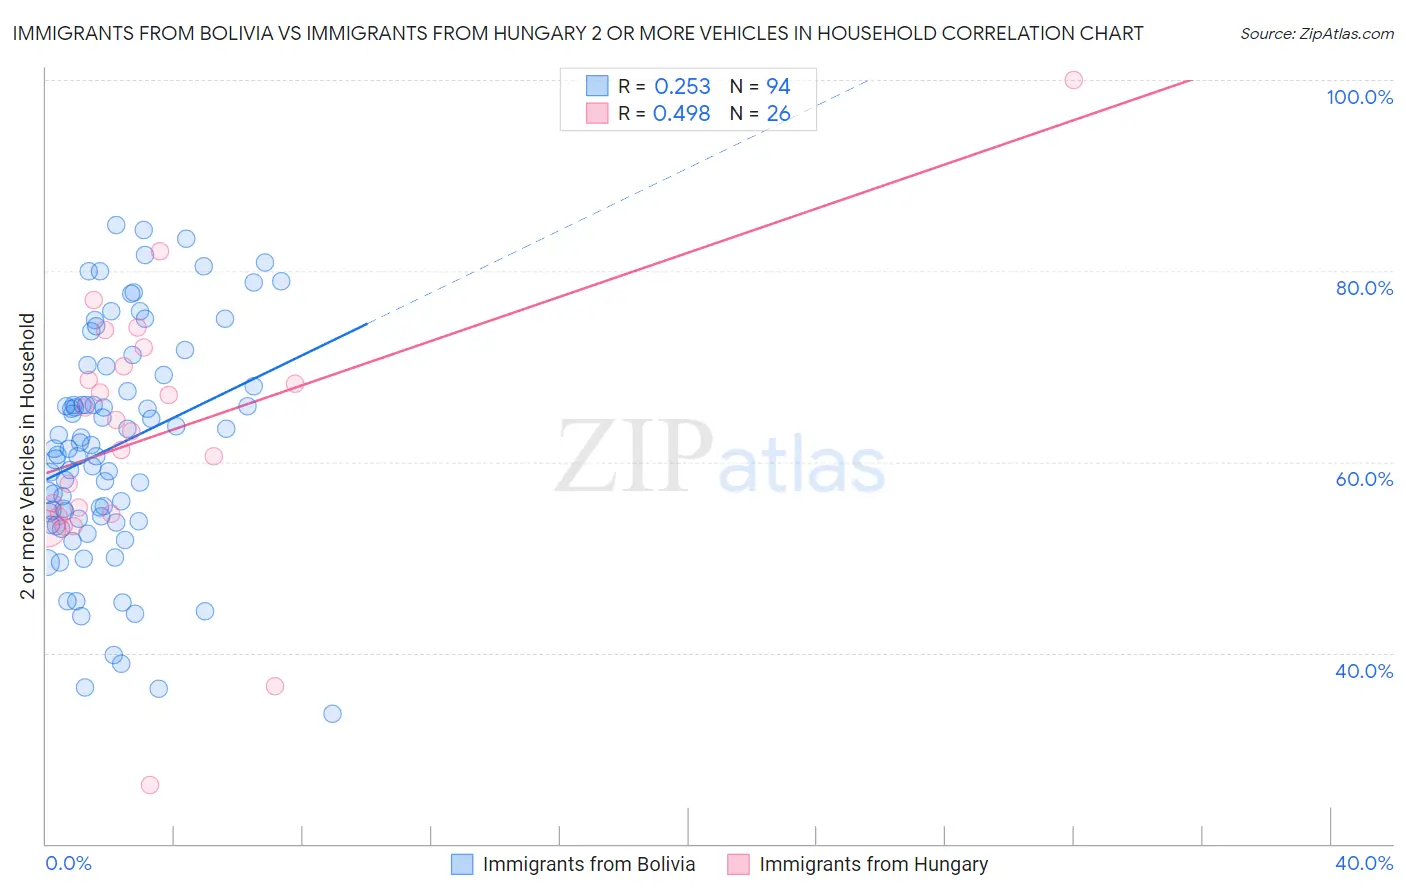 Immigrants from Bolivia vs Immigrants from Hungary 2 or more Vehicles in Household